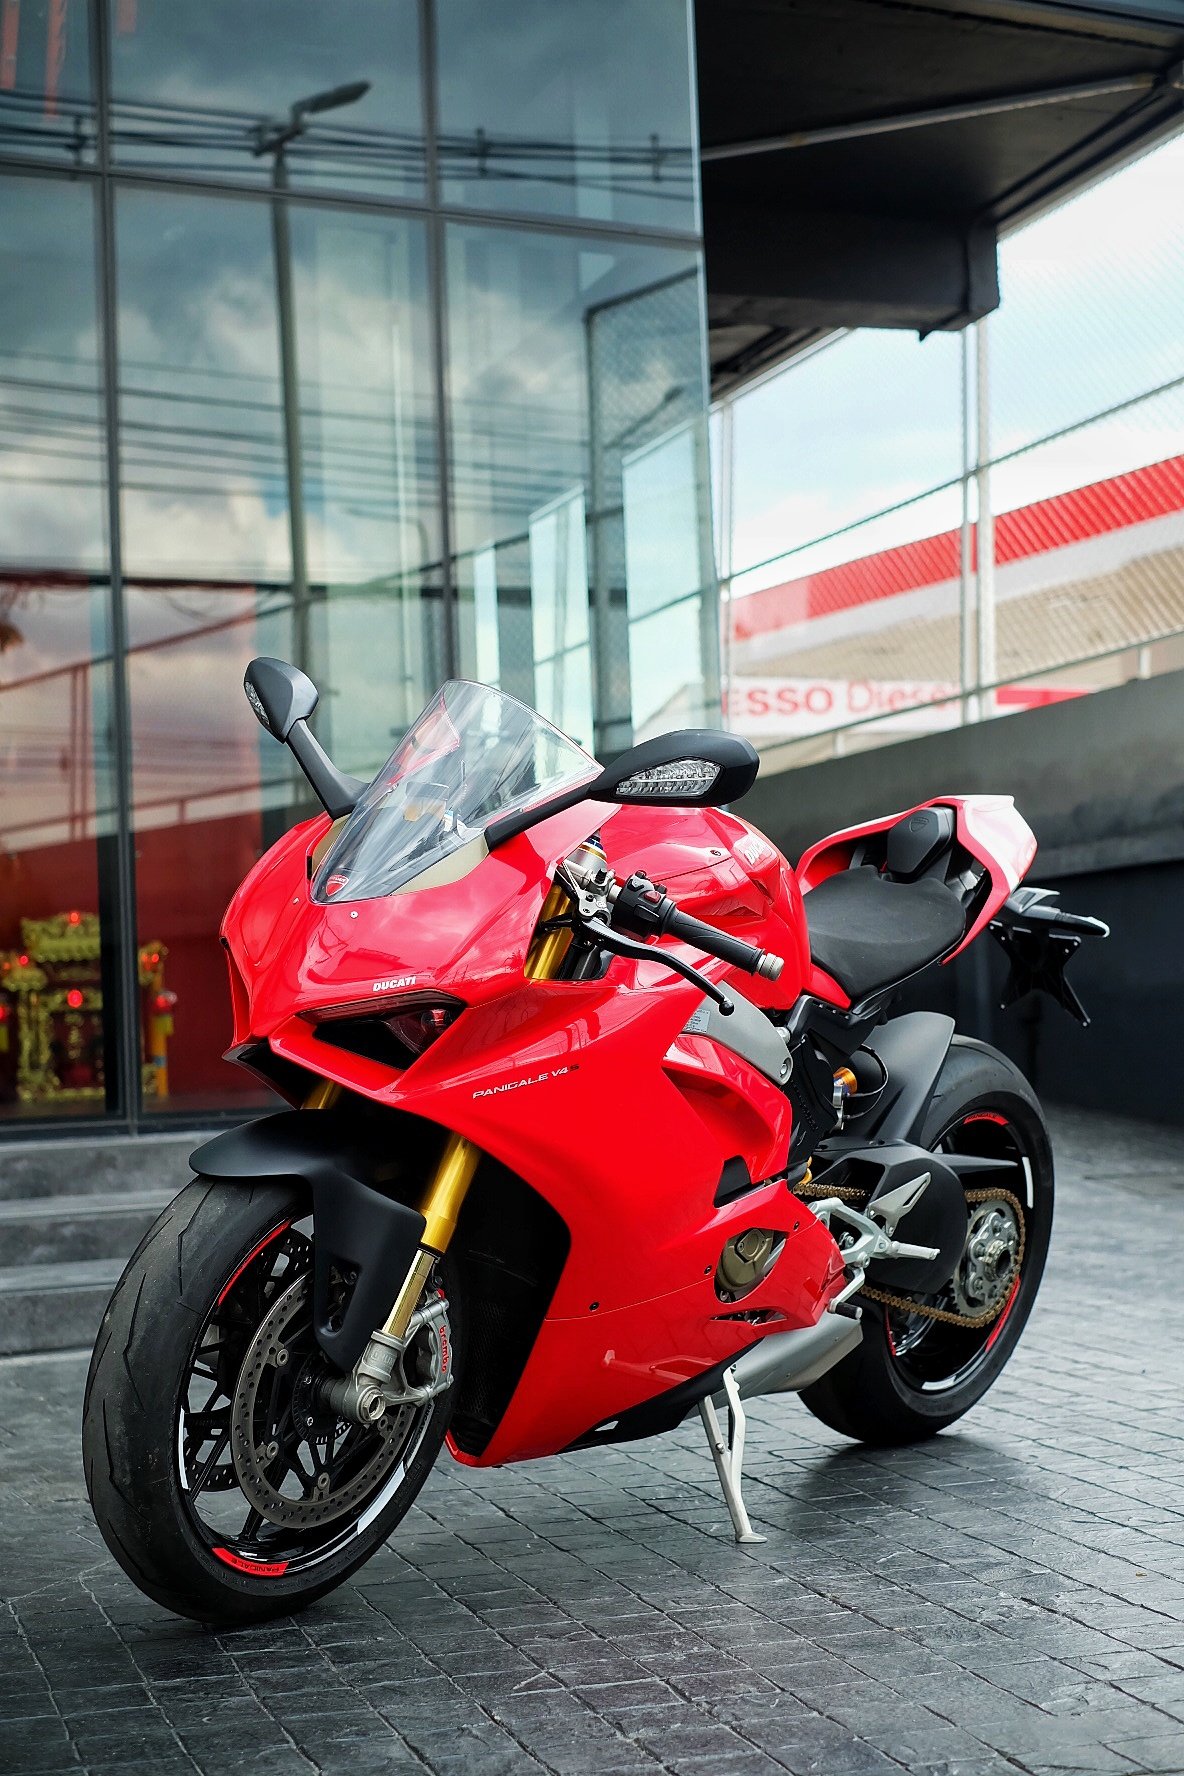 DUCATI PANIGALE V4S 2020 FOR SALE SPECIAL PRICE!